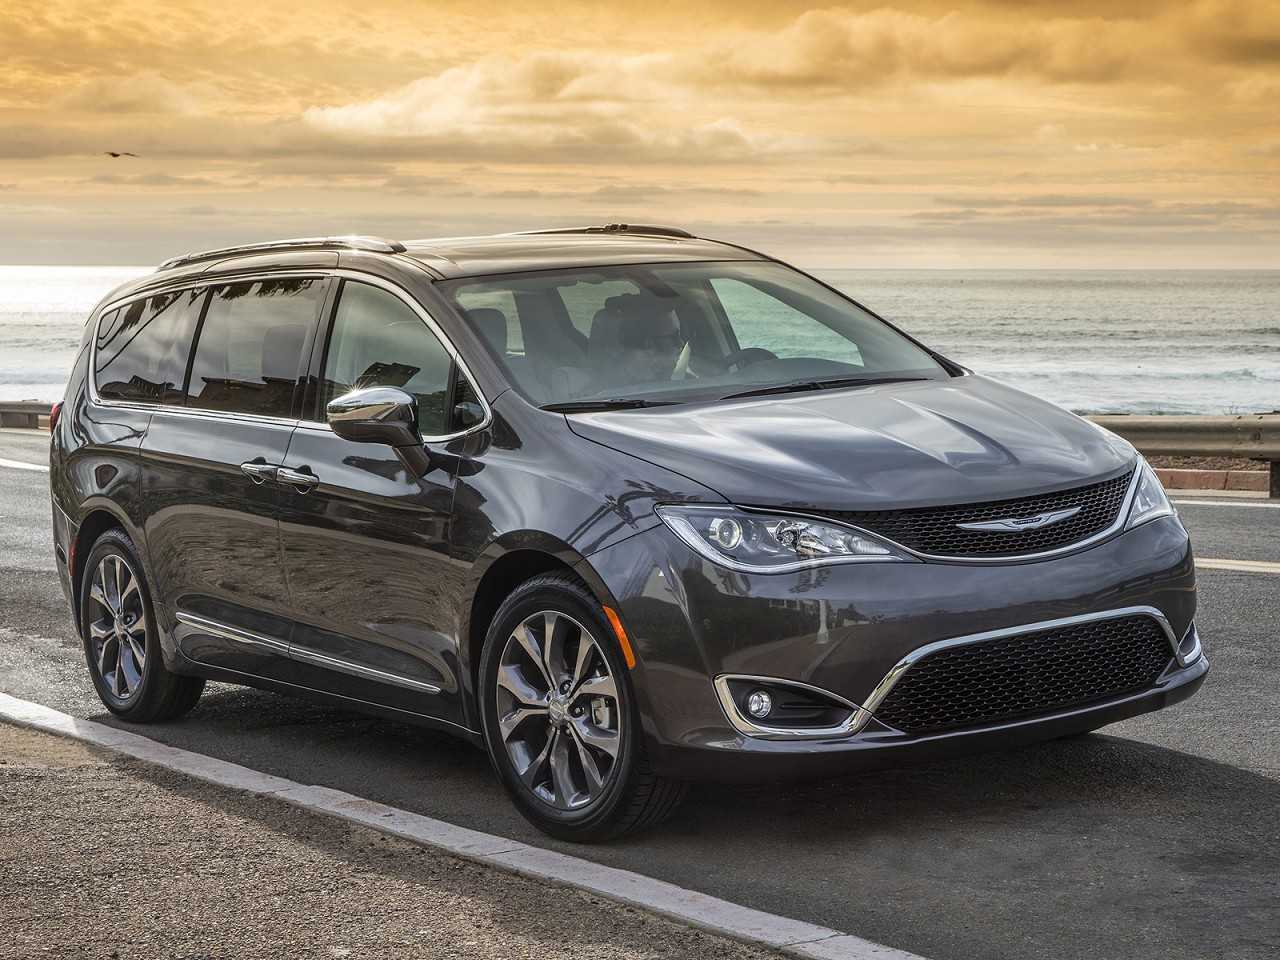 ChryslerPacifica 2017 - ngulo frontal